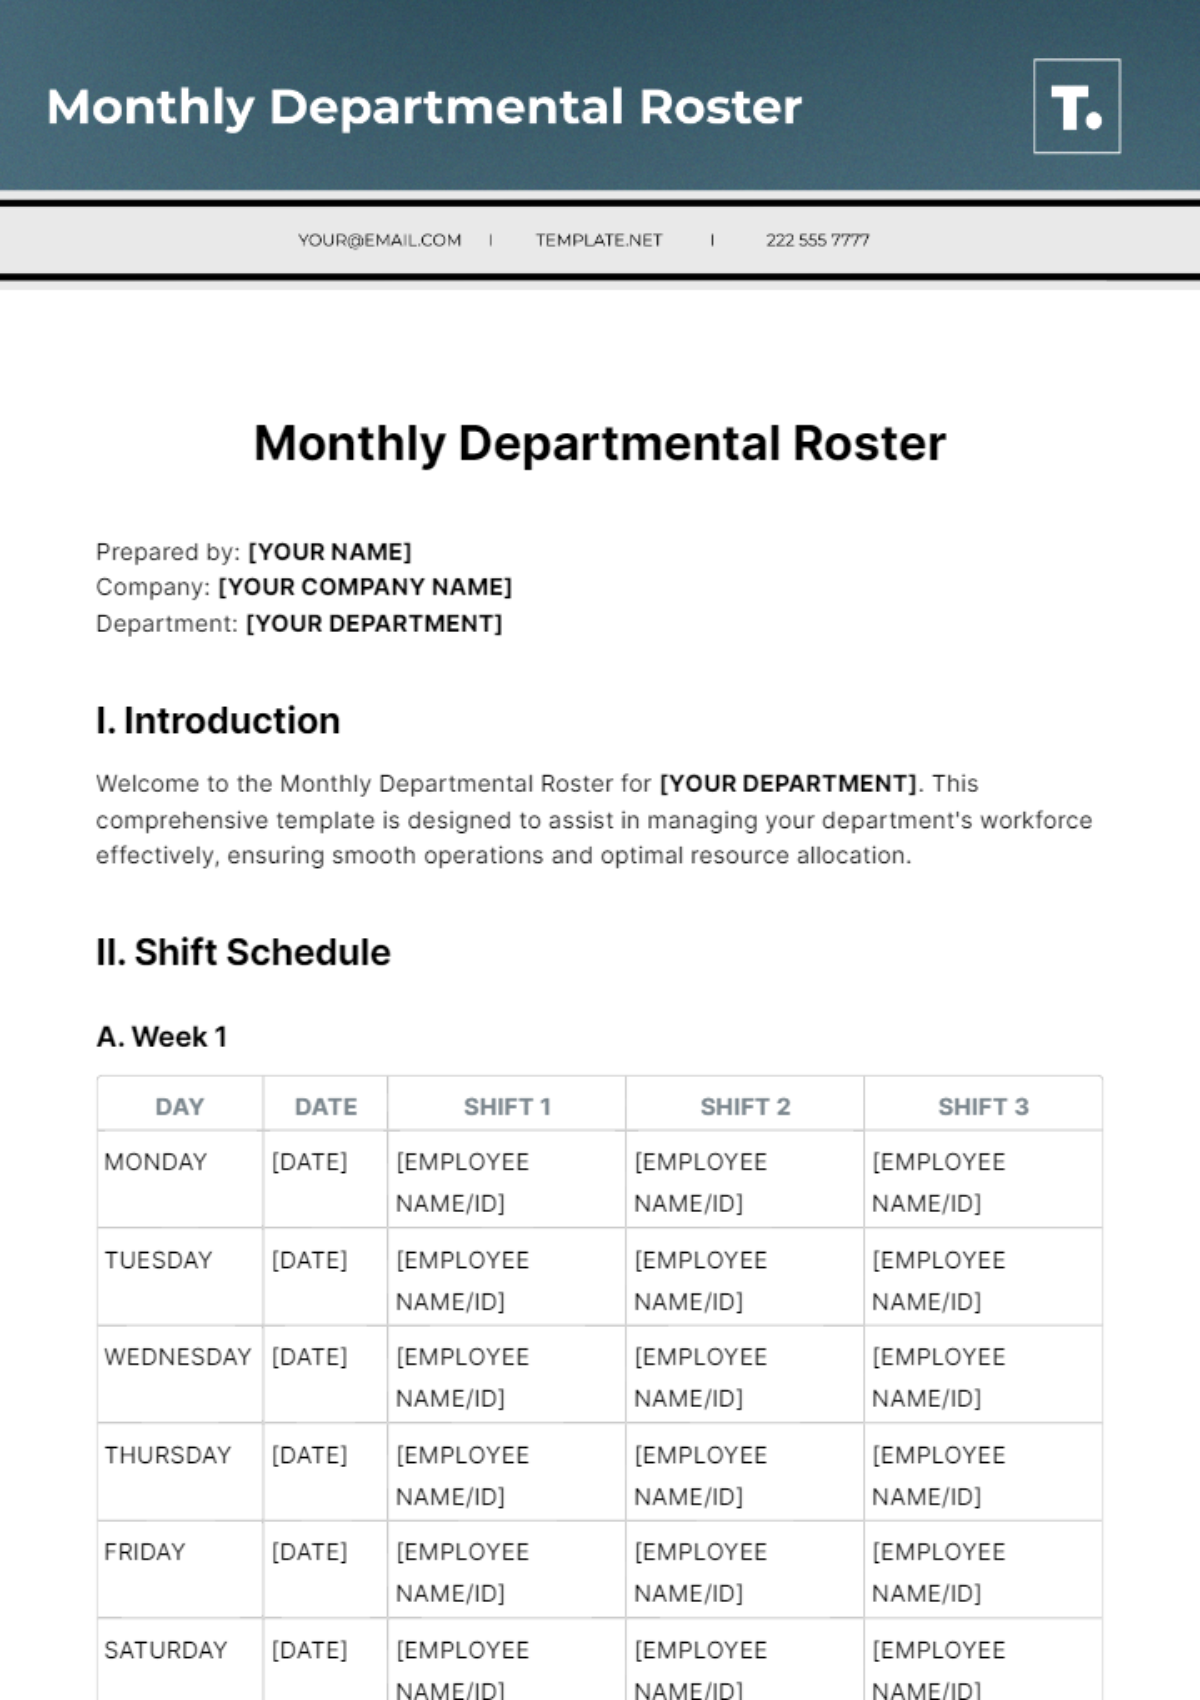 Free Monthly Departmental Roster Template